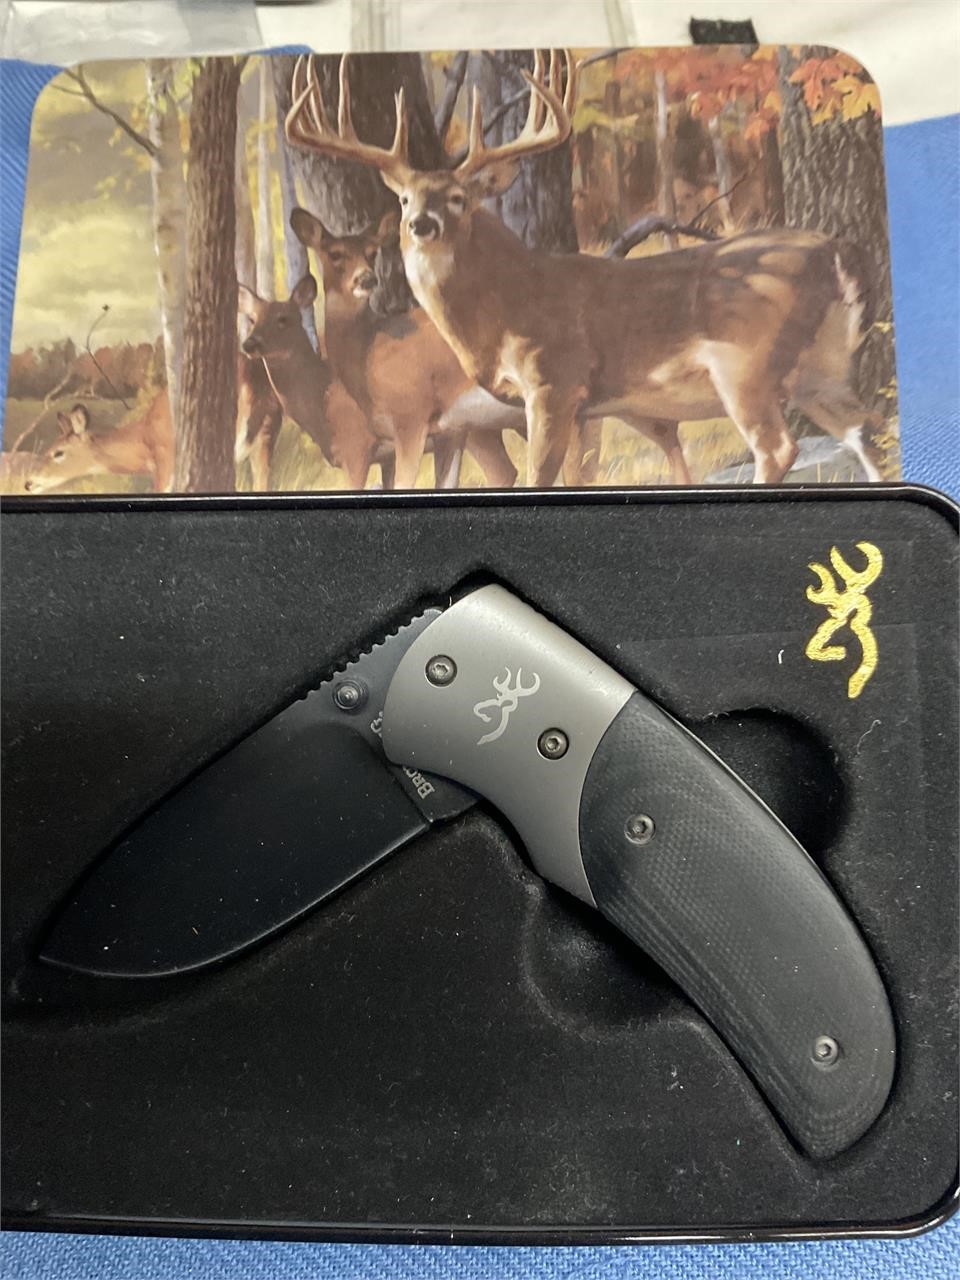 Browning knife in case